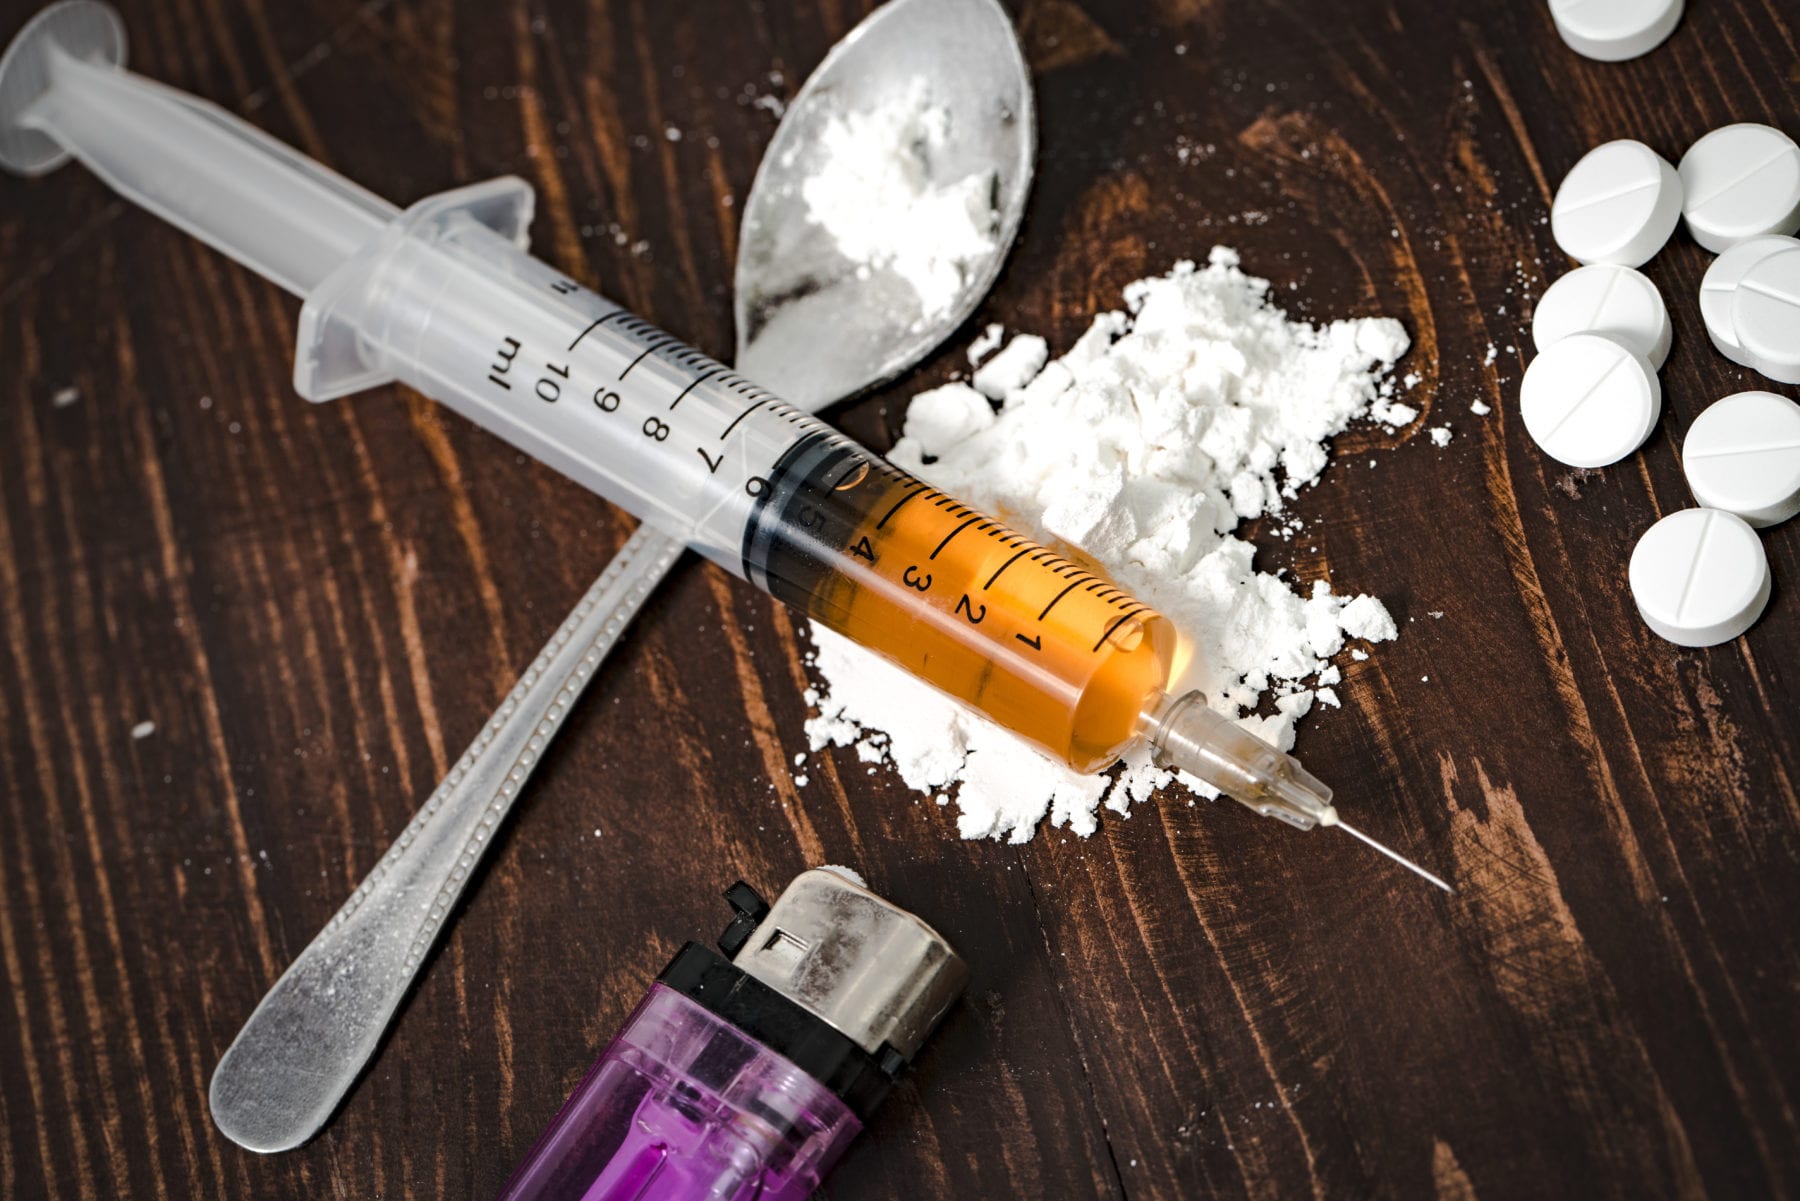 8 Counties Have Highest Opioid Overdose Rates In New York